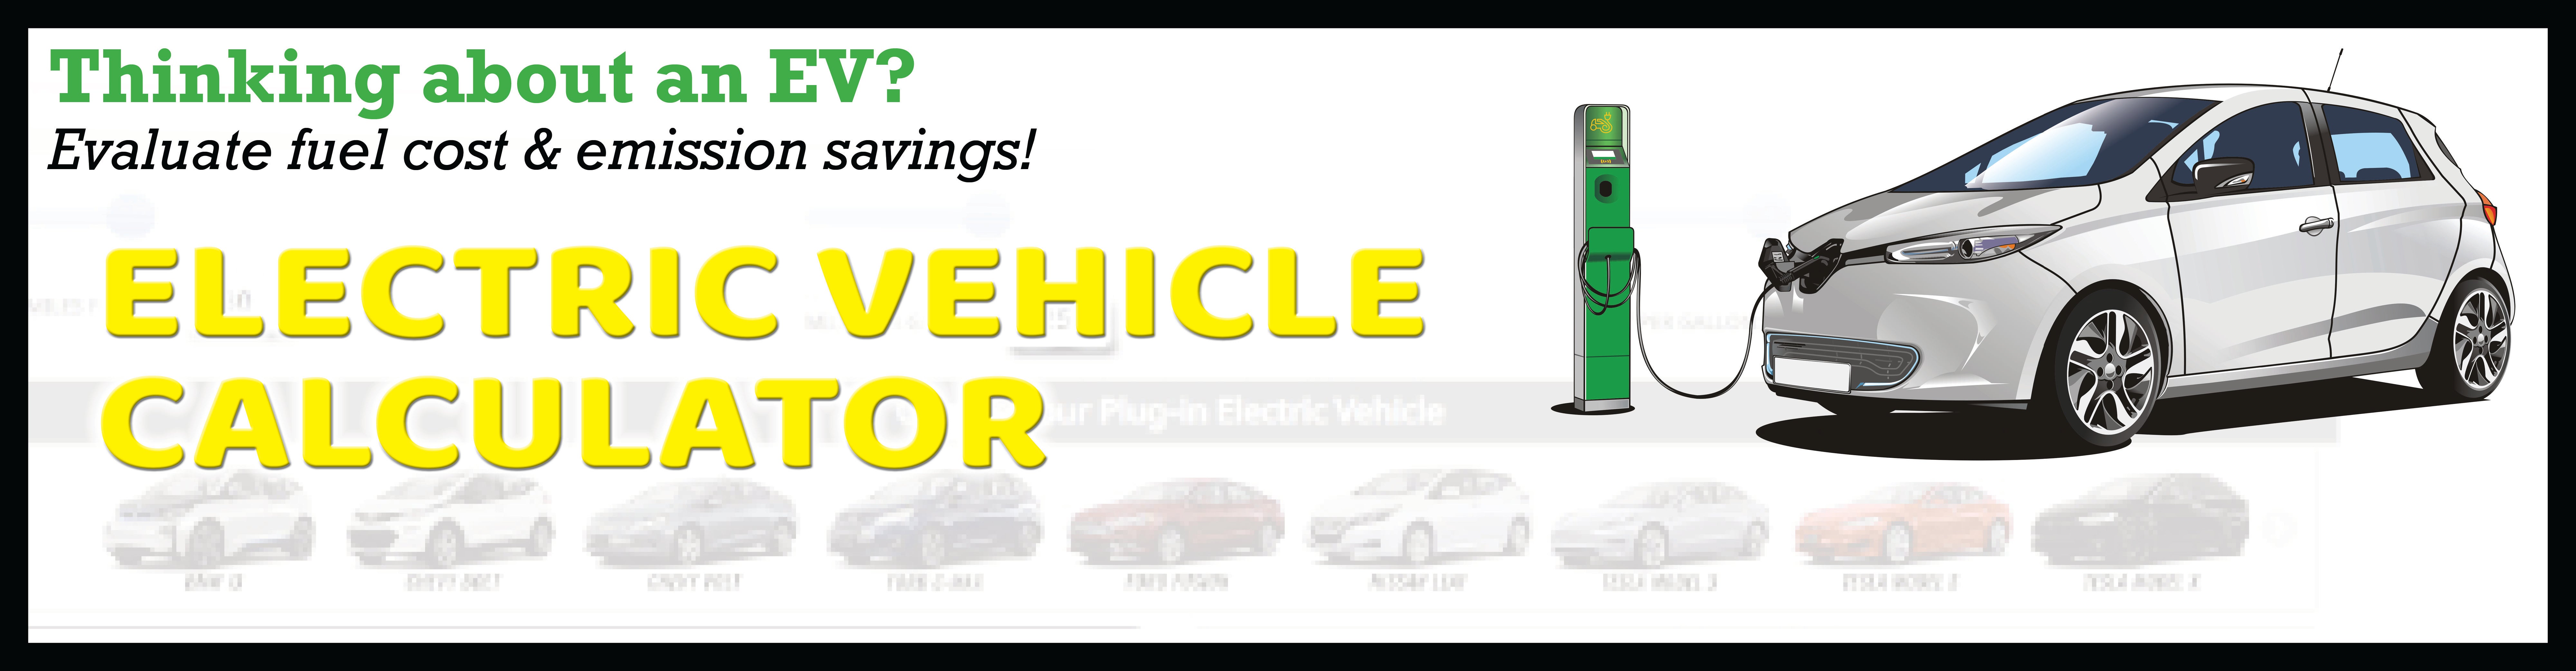 Click to try the new electric vehicle calculator!